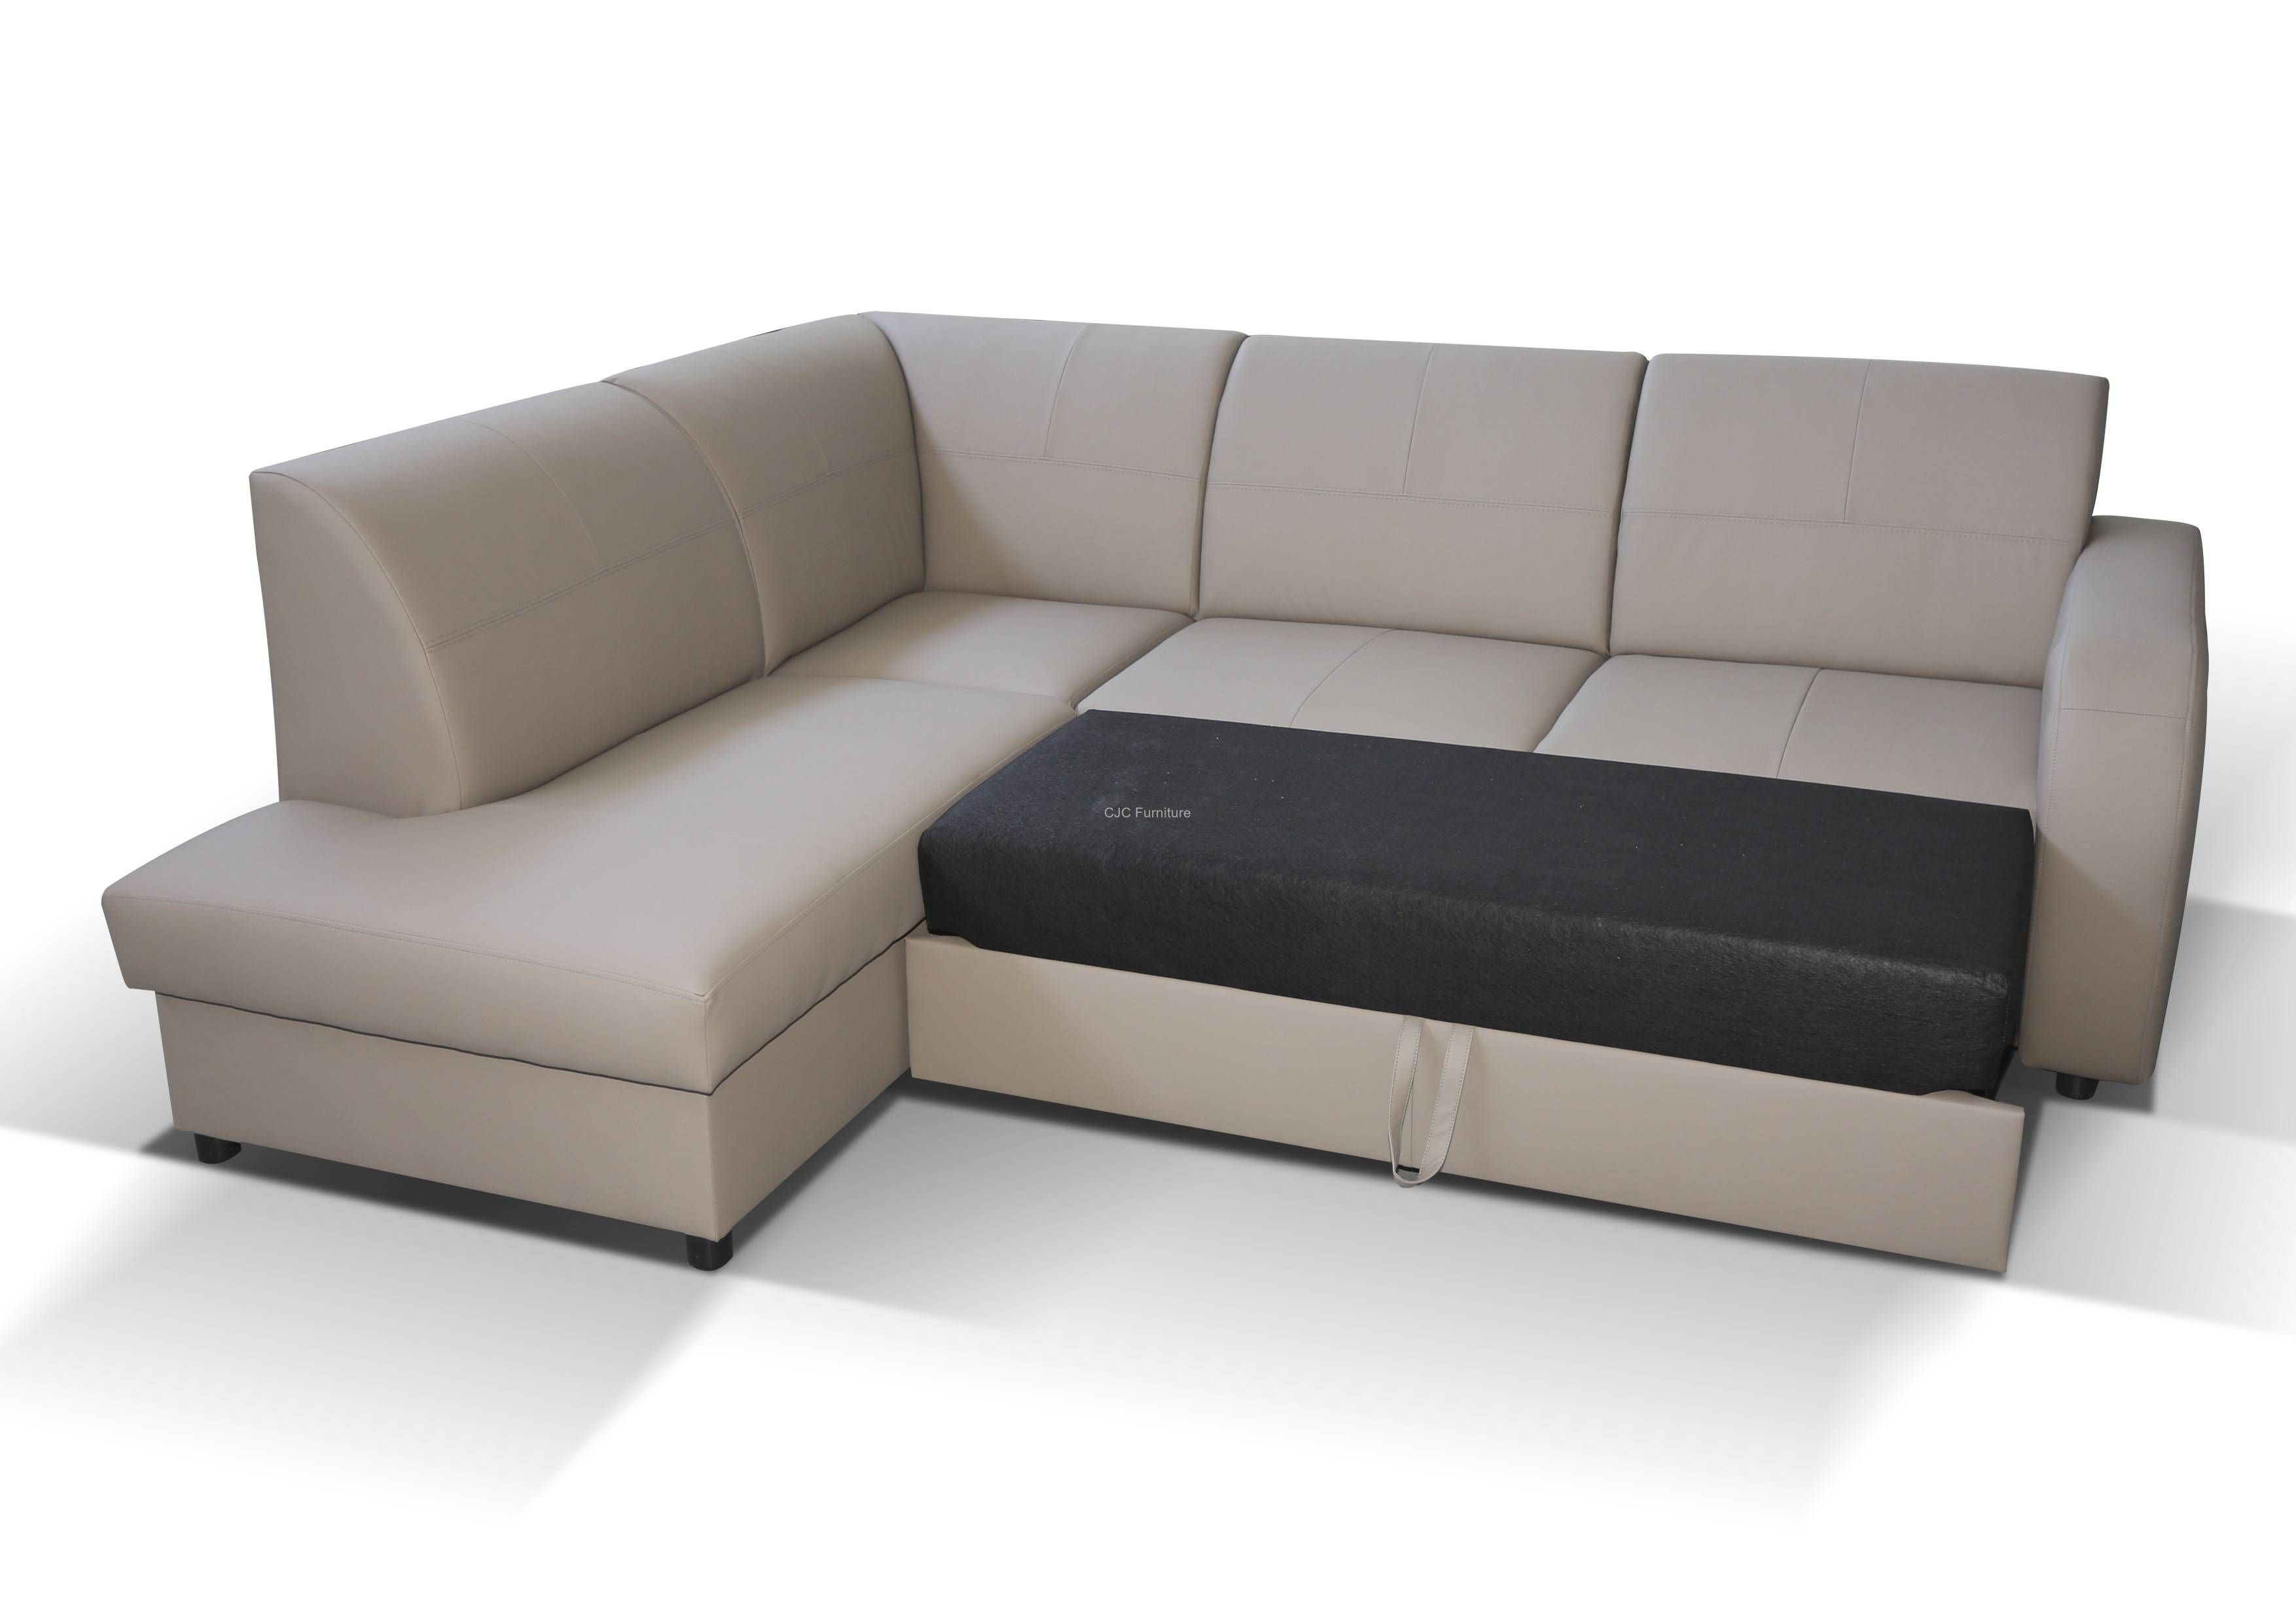 Corner Sofa Bed Style For New Home Design | Eva Furniture Throughout Cheap Corner Sofa Beds (View 2 of 30)